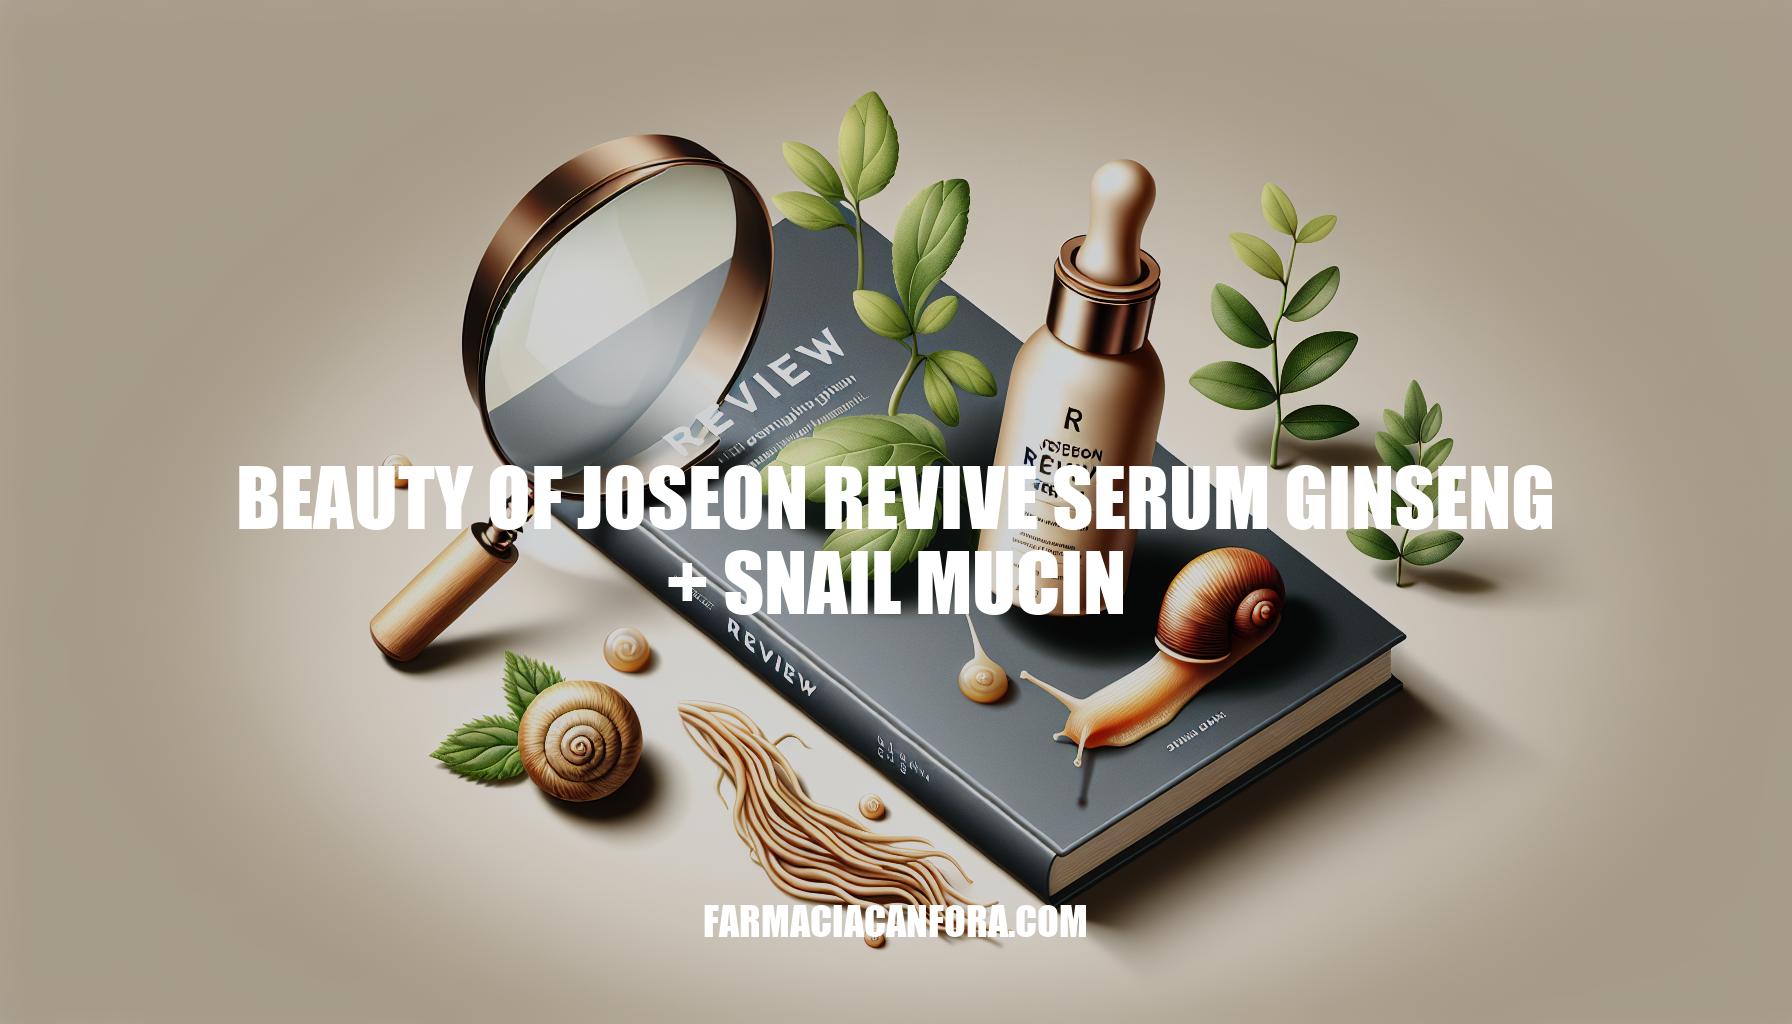 Beauty of Joseon Revive Serum Ginseng + Snail Mucin: Product Review and Guide